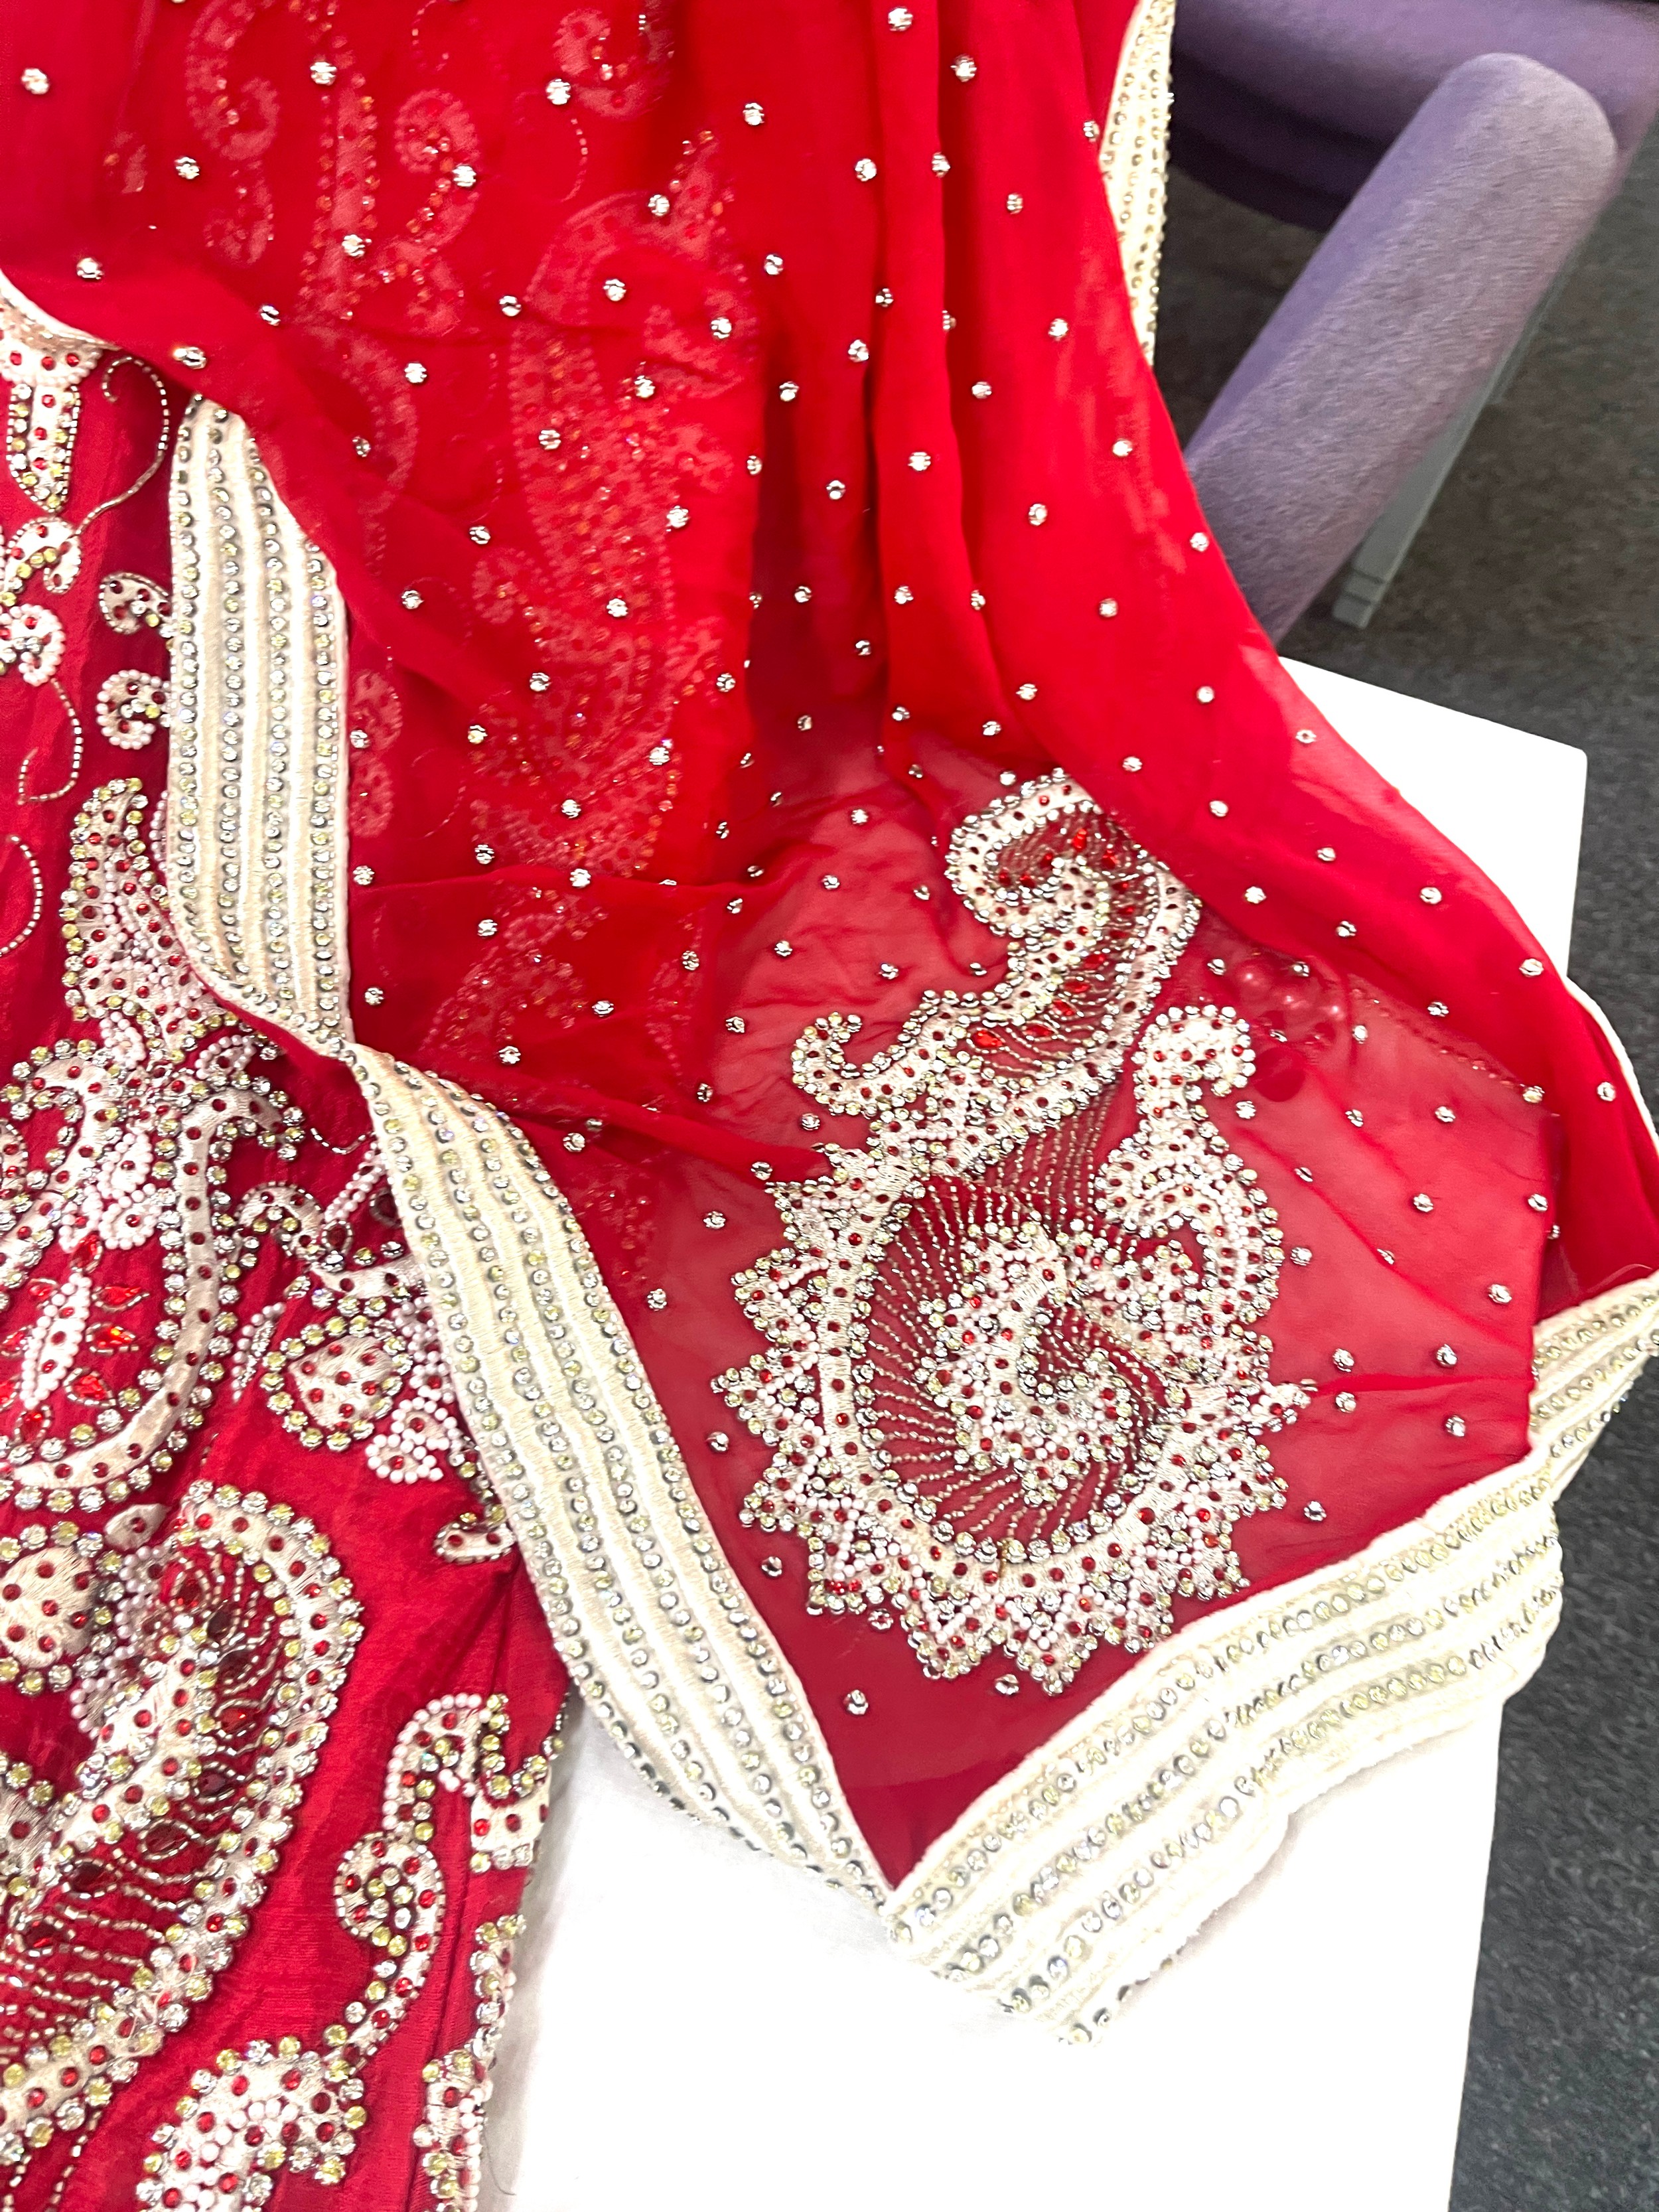 Genuine Indian ladies wedding trousers, dress and head scarf, fully lined with hand stitched pearls, - Bild 3 aus 11